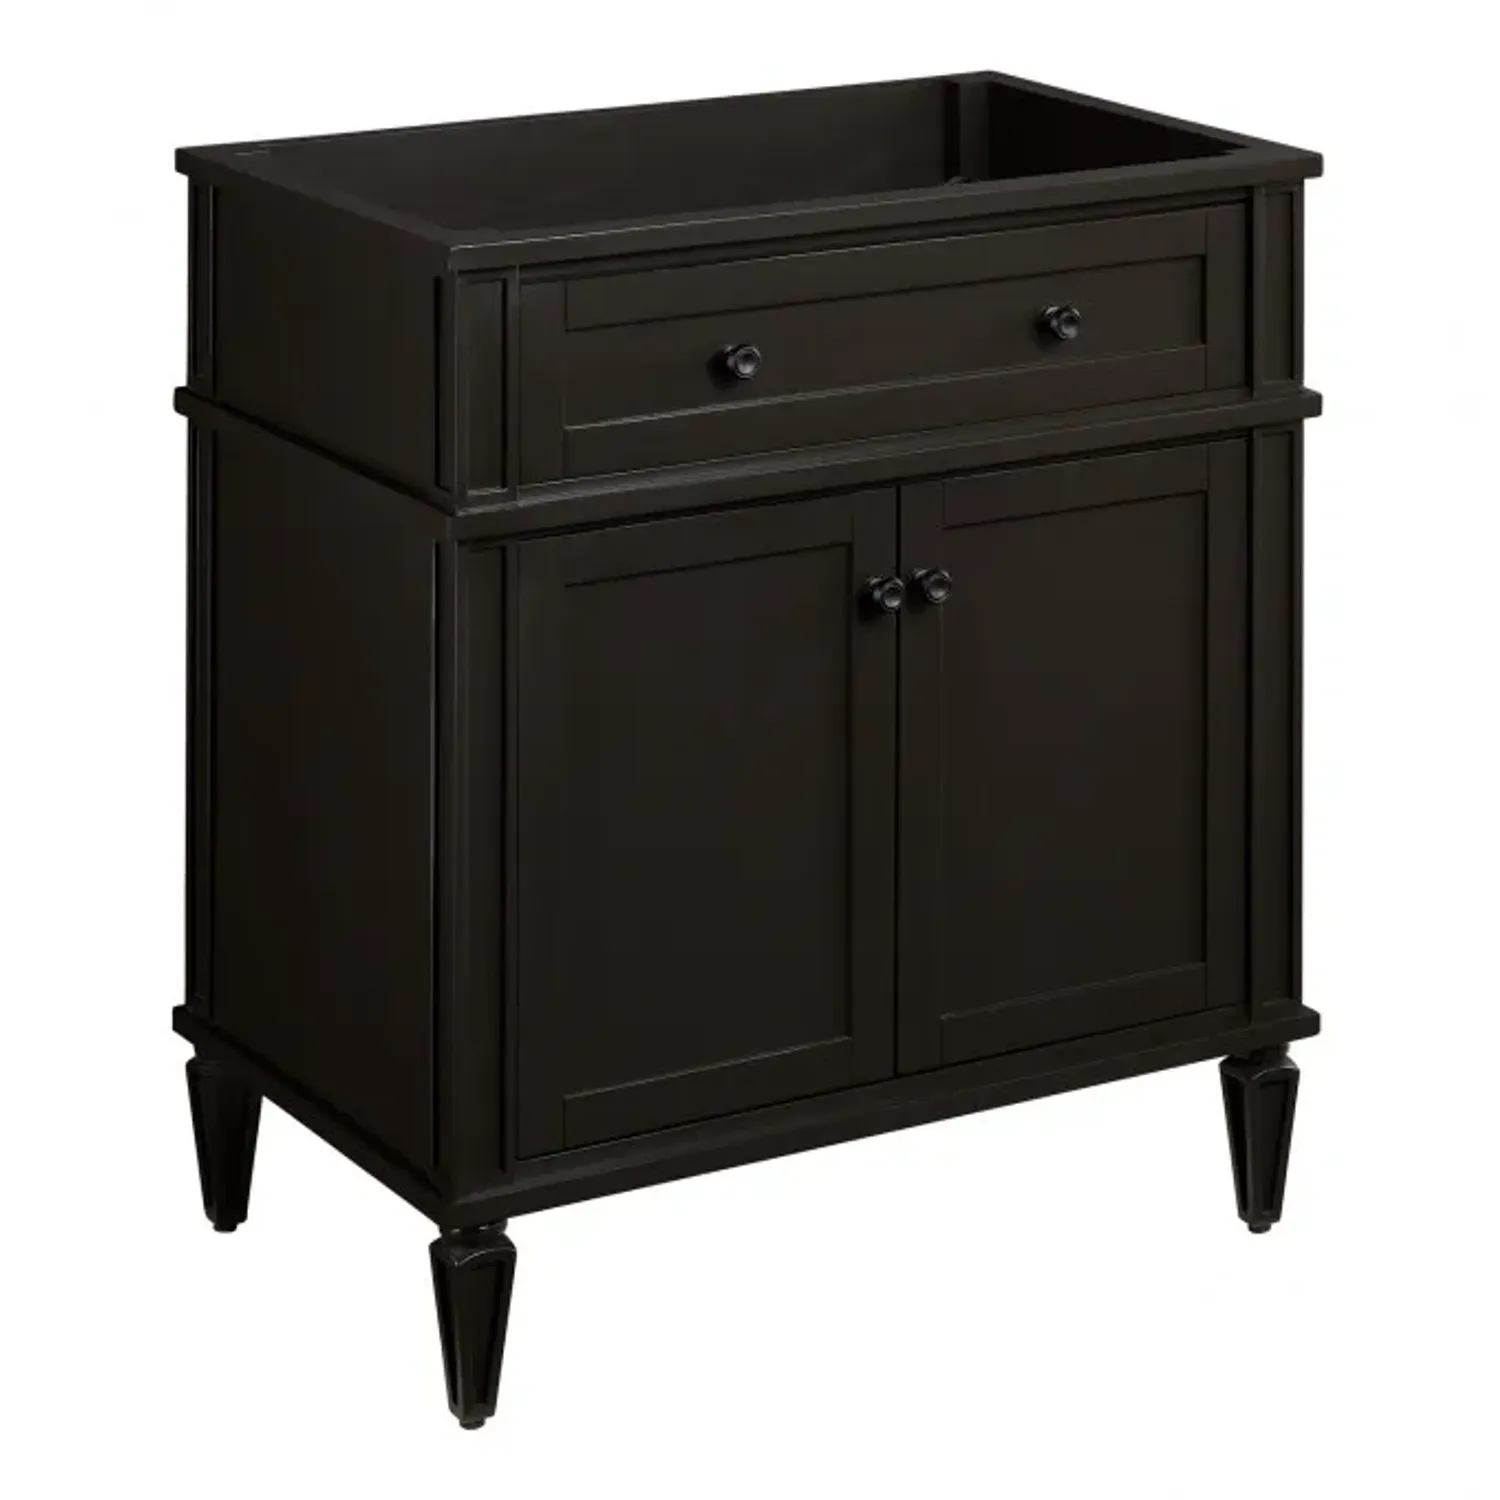 Shop 30" ELMDALE VANITY FOR UNDERMOUNT SINK - CHARCOAL BLACK from Signature Hardware on Openhaus